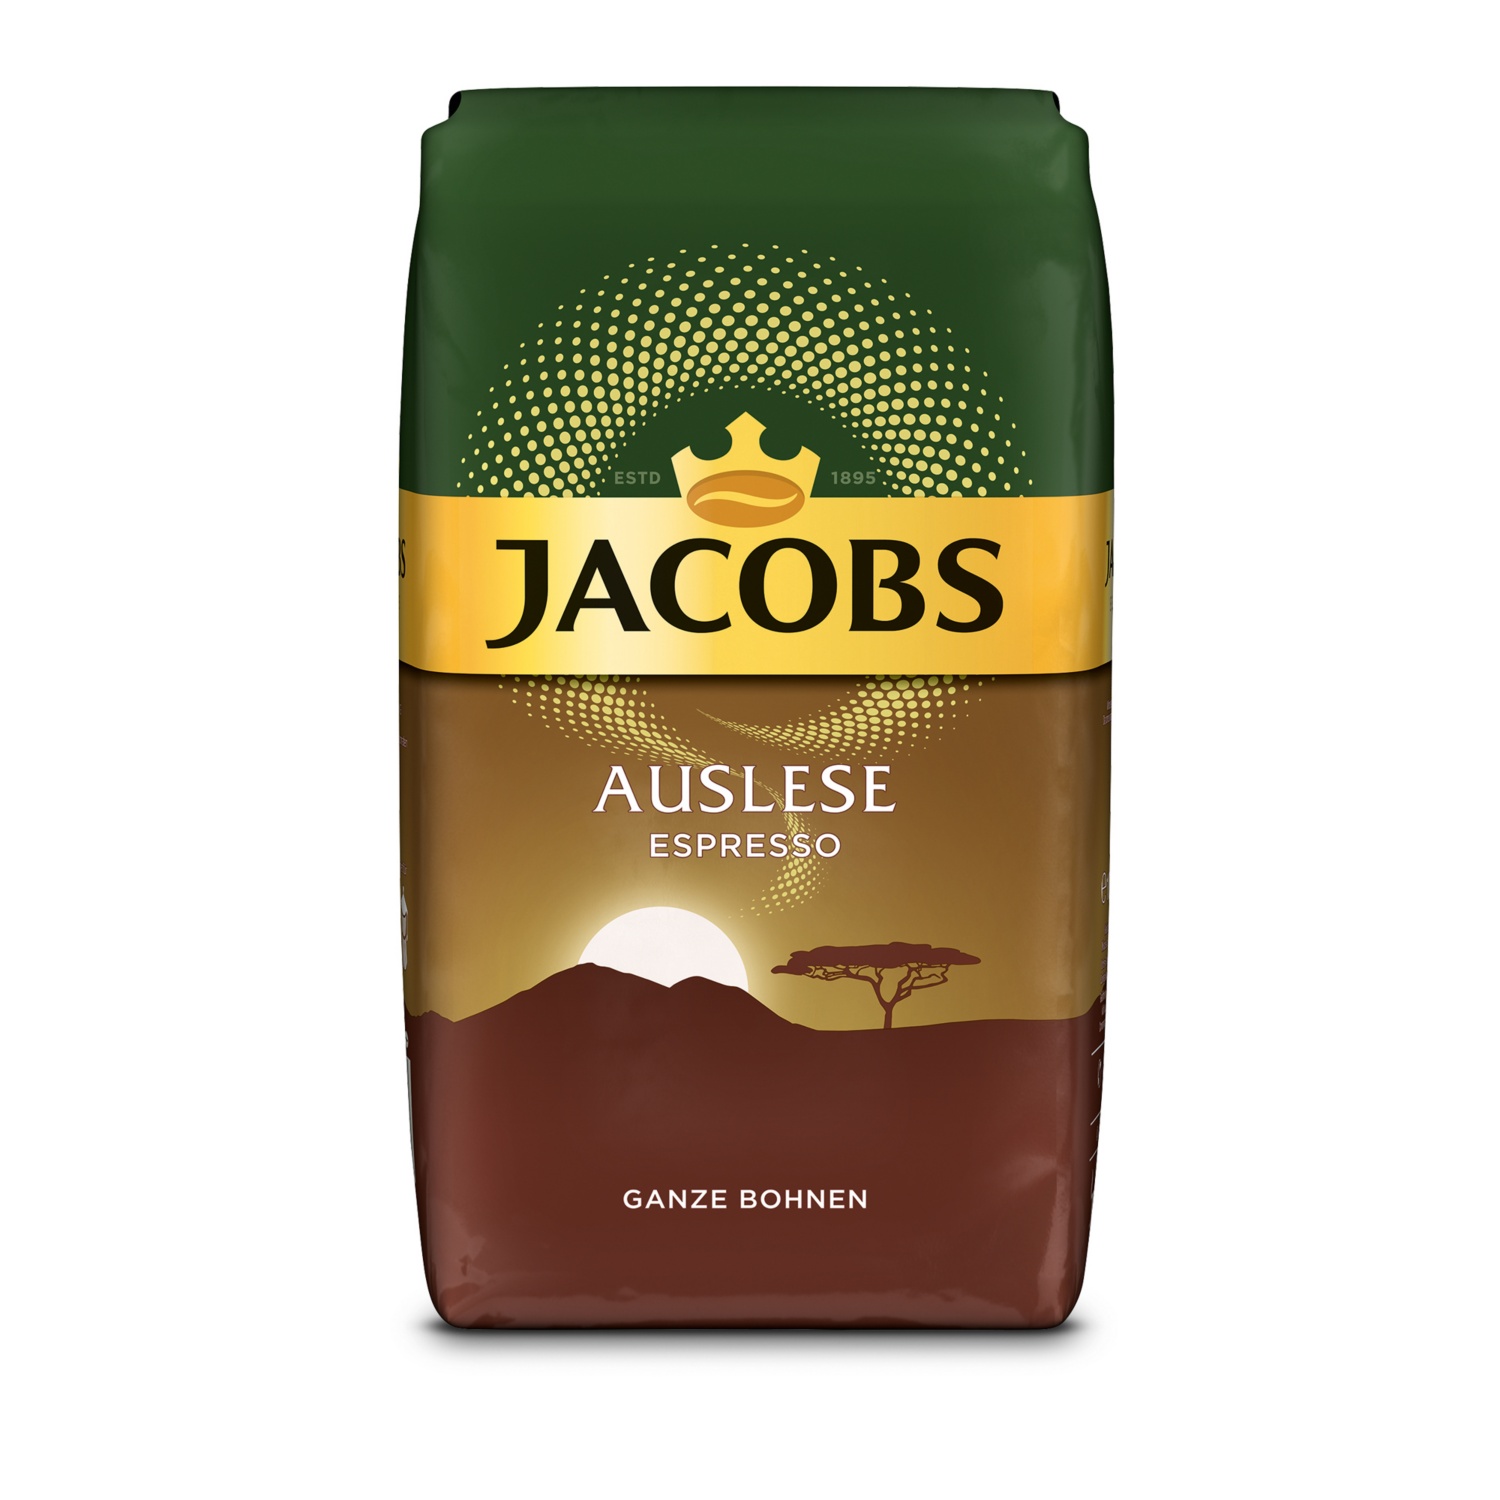 JACOBS Auslese, Espresso